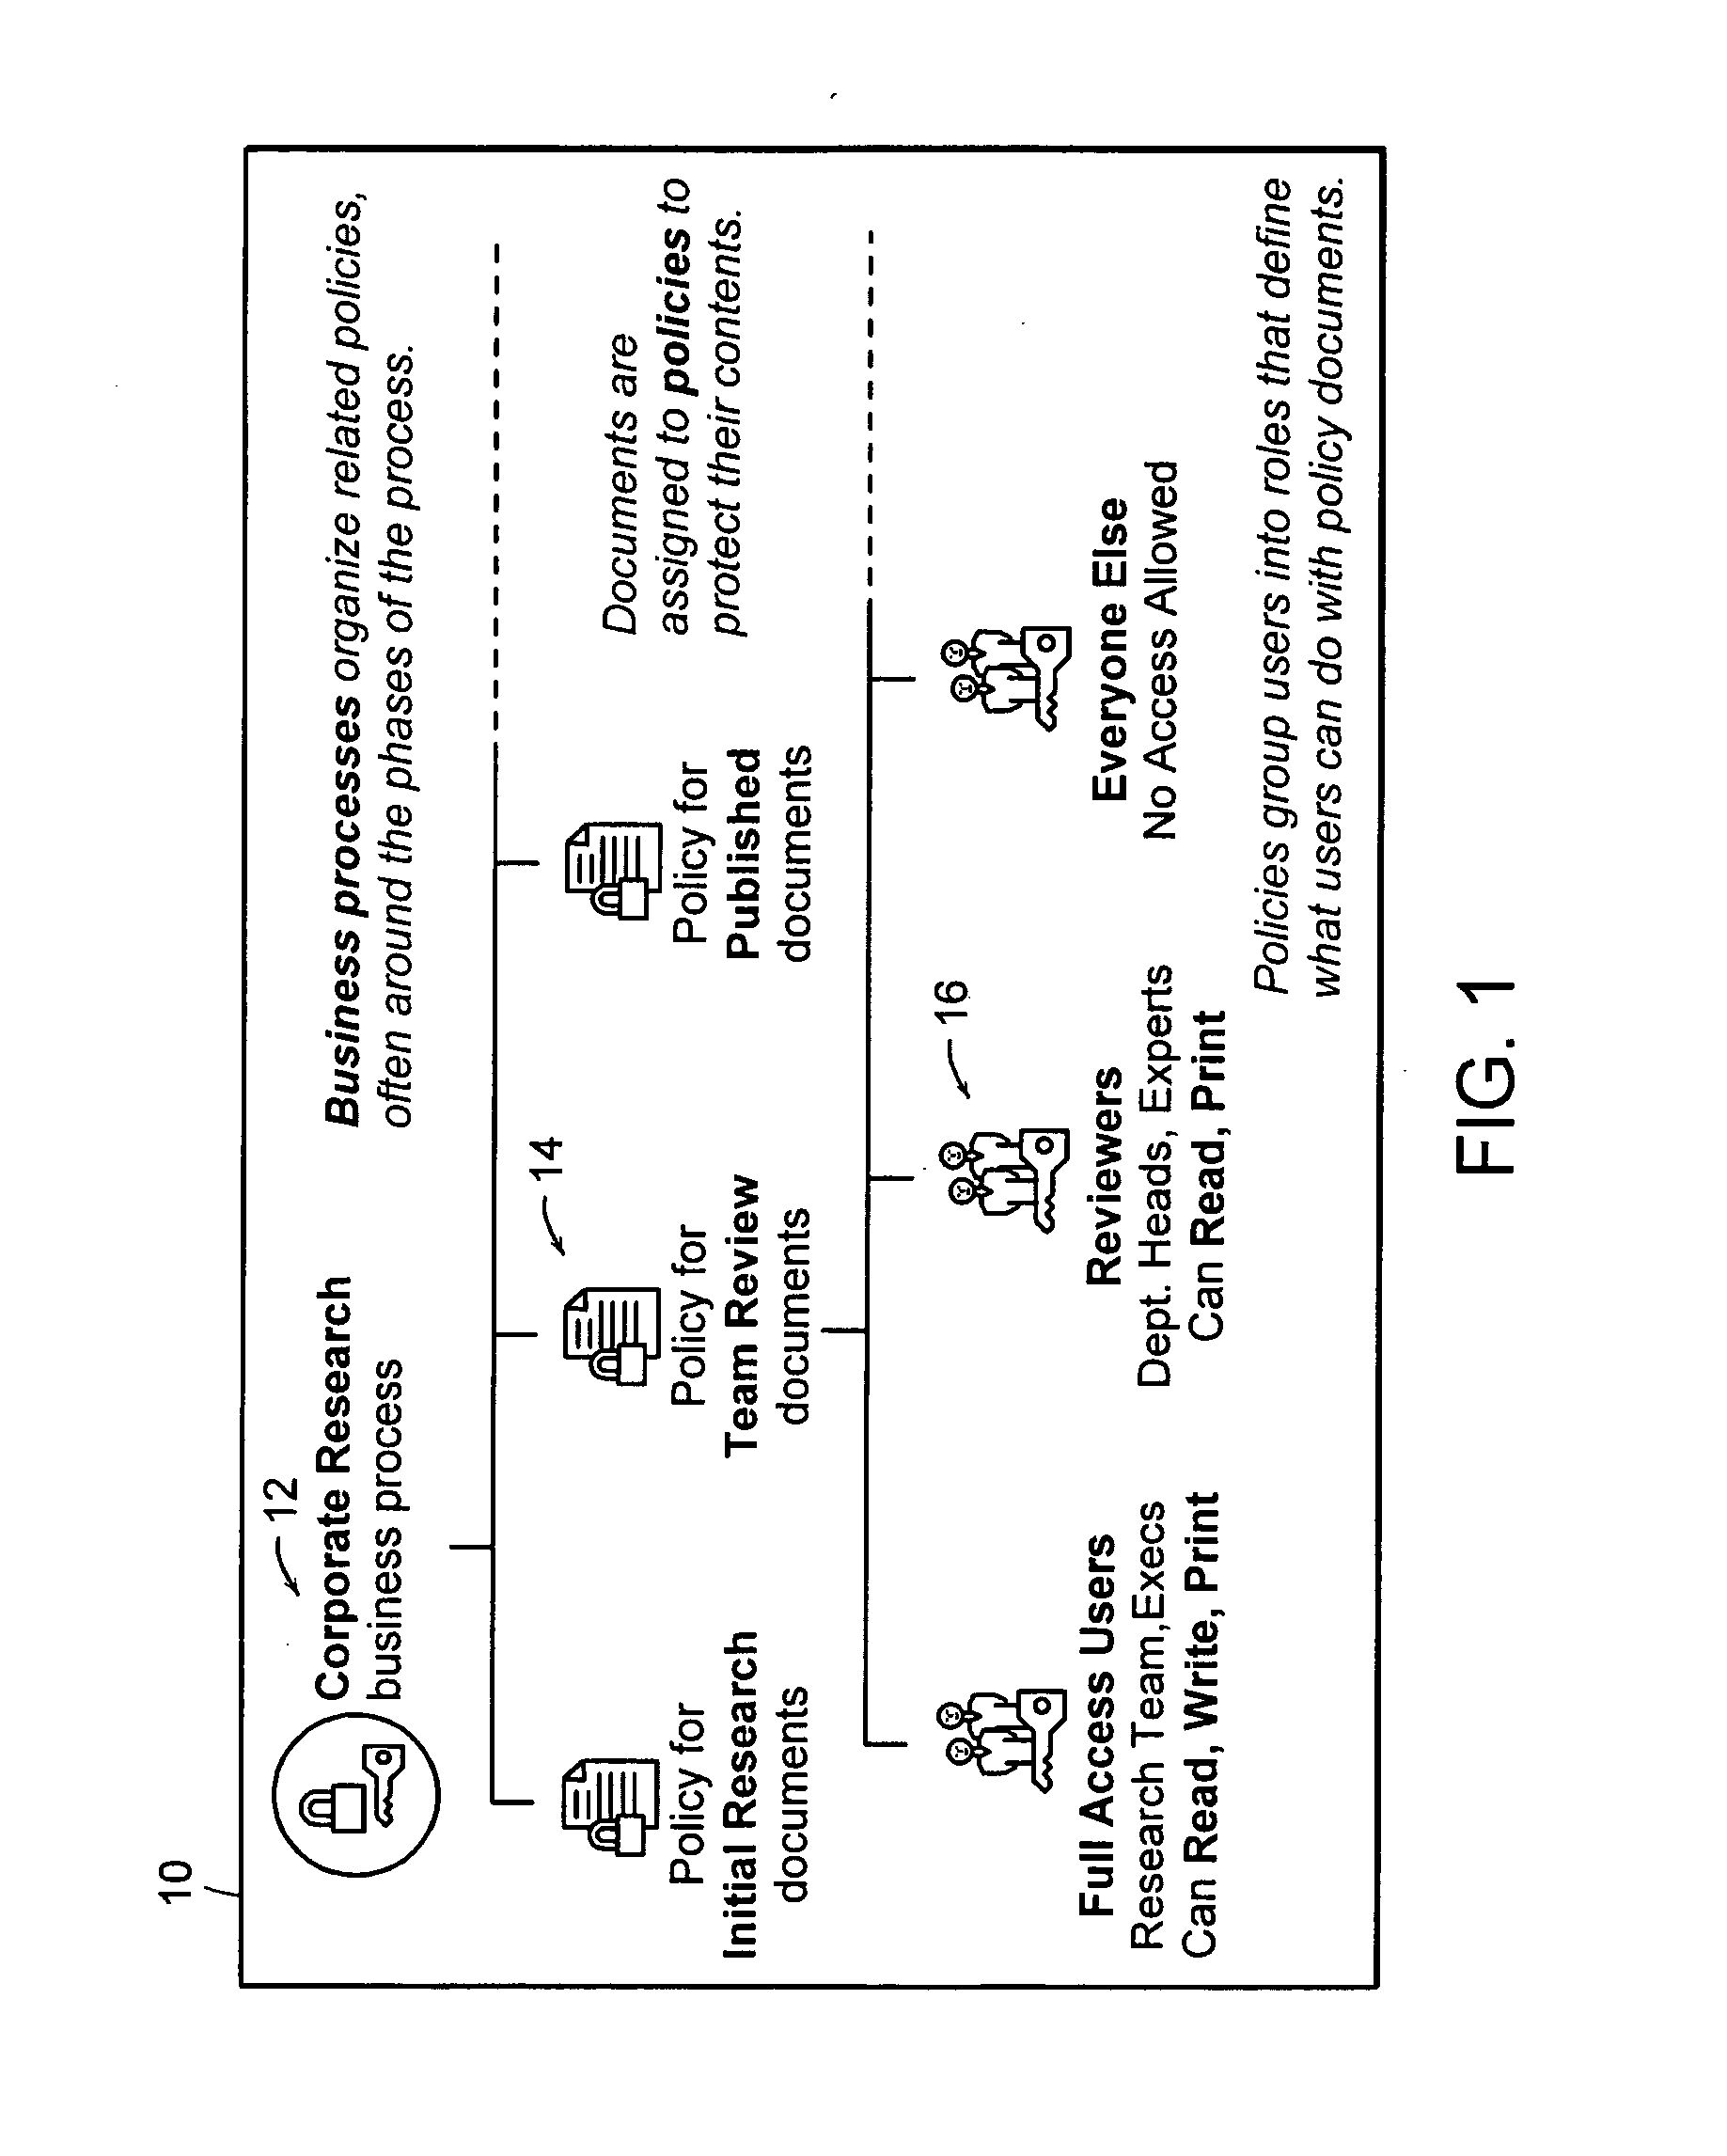 Computer method and apparatus for securely managing data objects in a distributed context